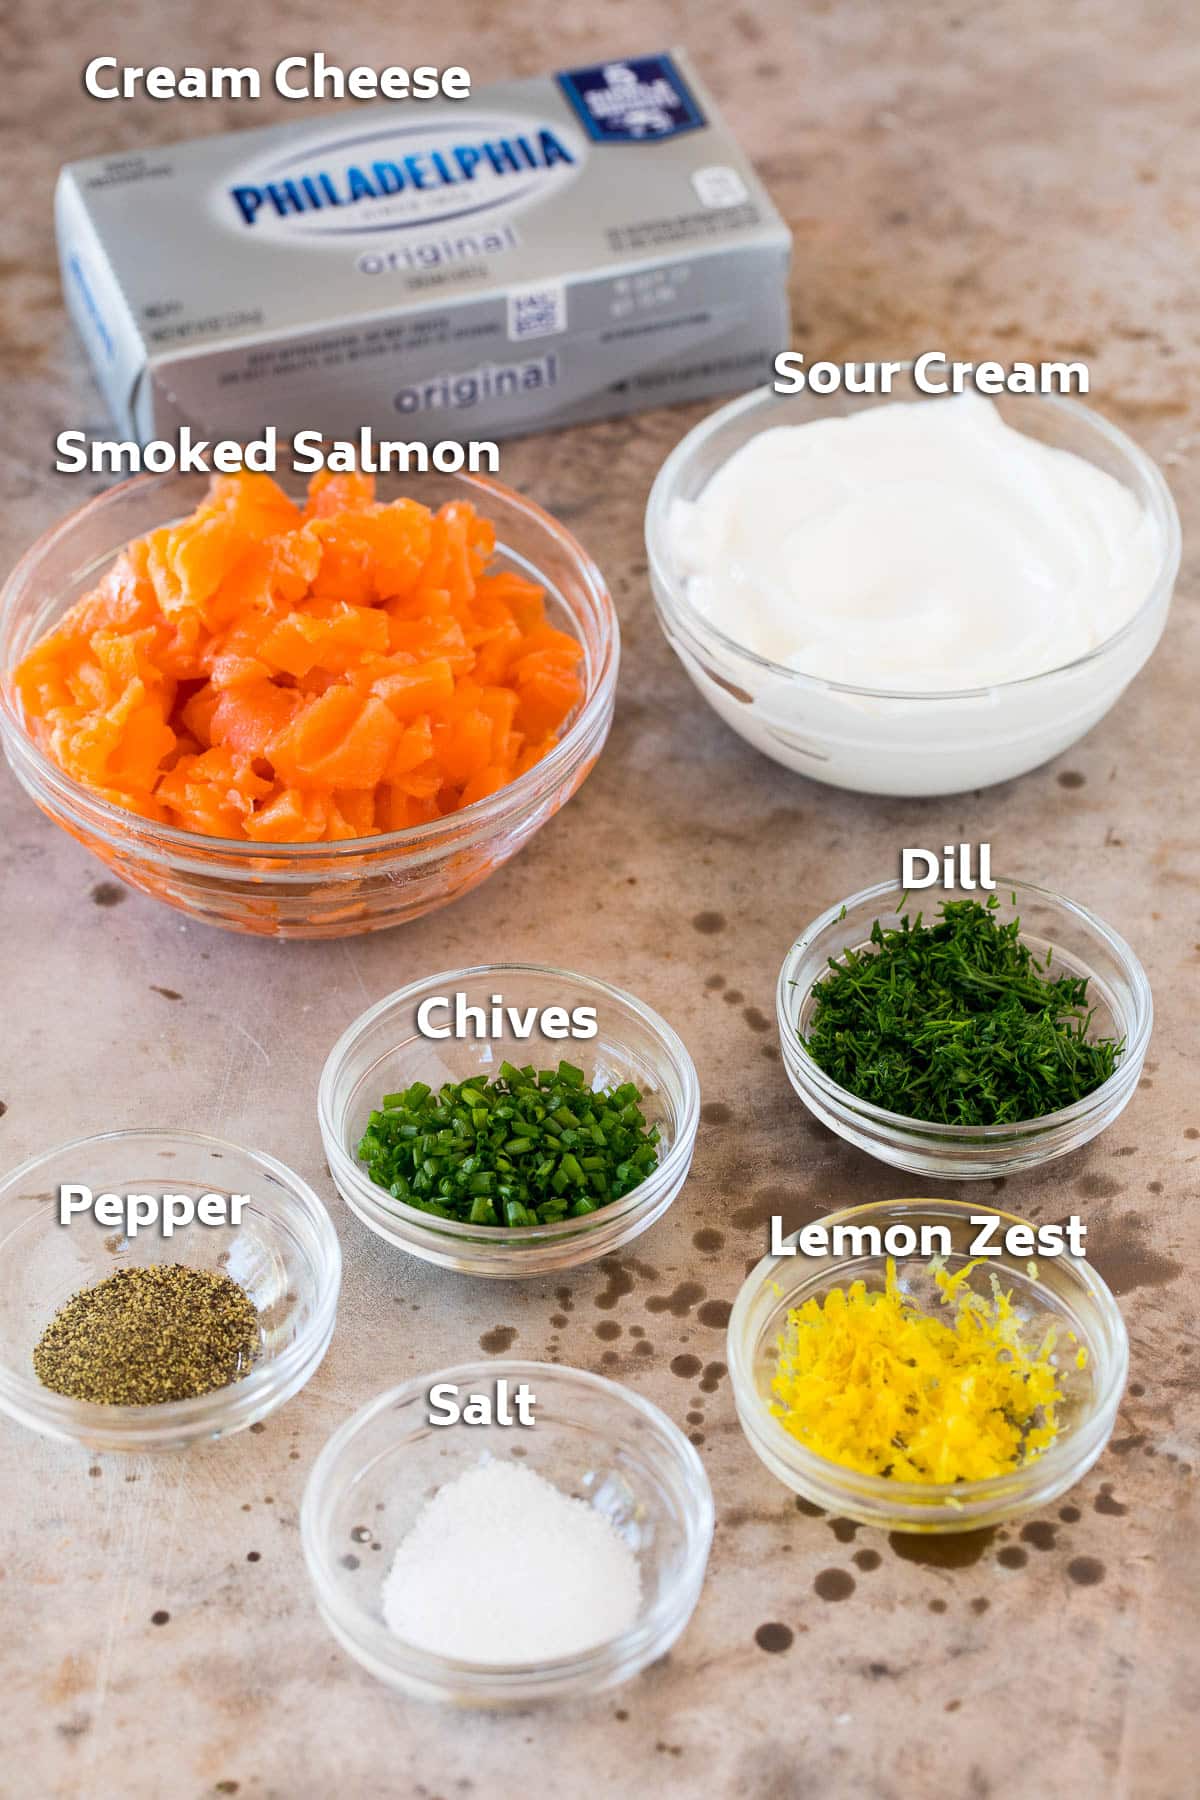 Ingredients including cream cheese, sour cream, smoked salmon and seasonings.